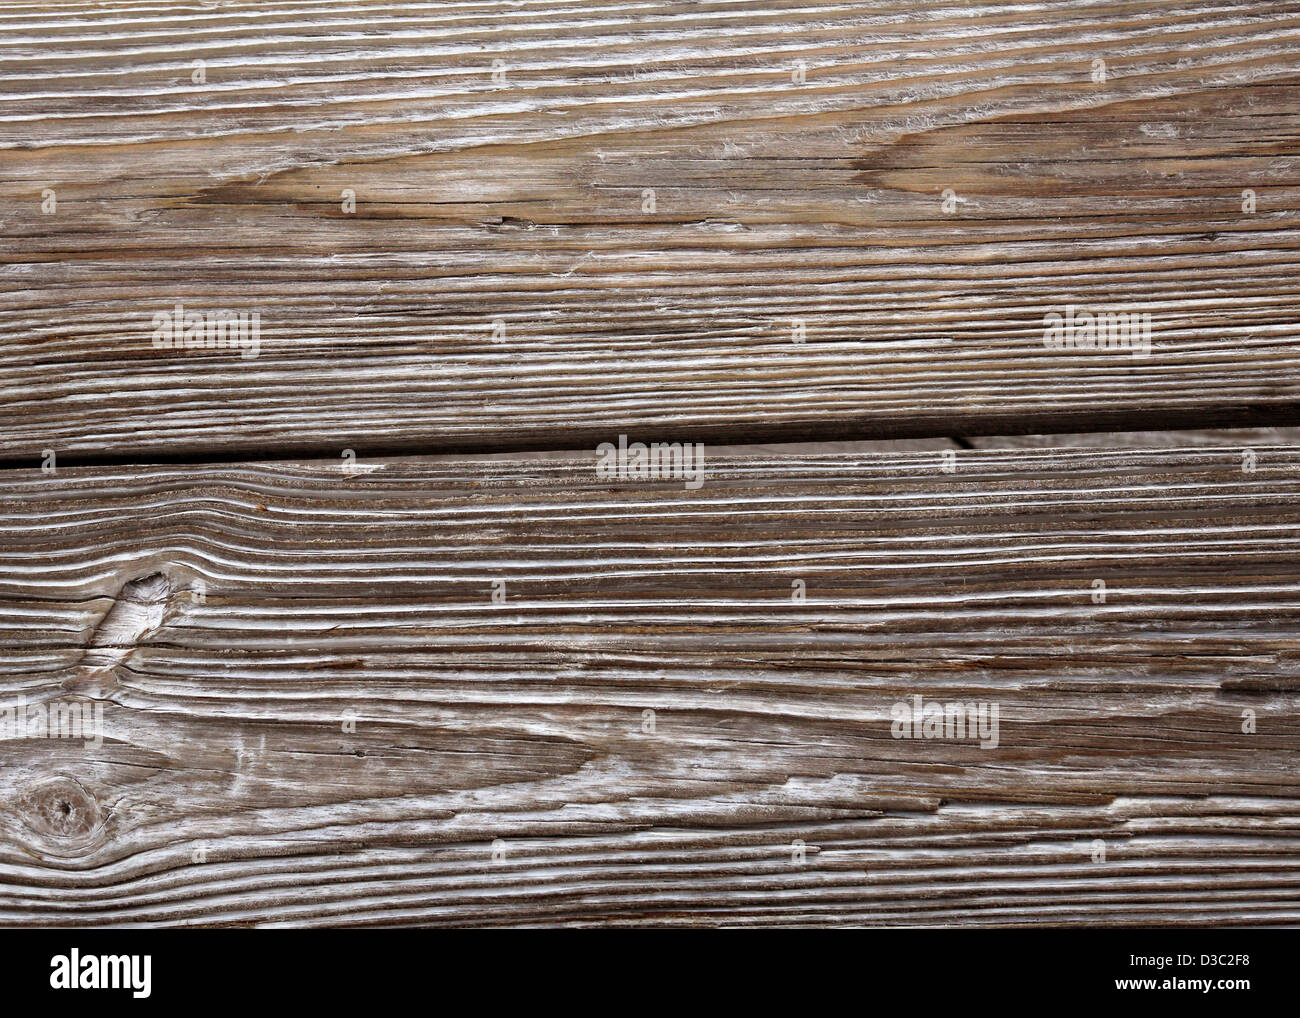 SUN BLEACHED WOOD BACKGROUND Stock Photo